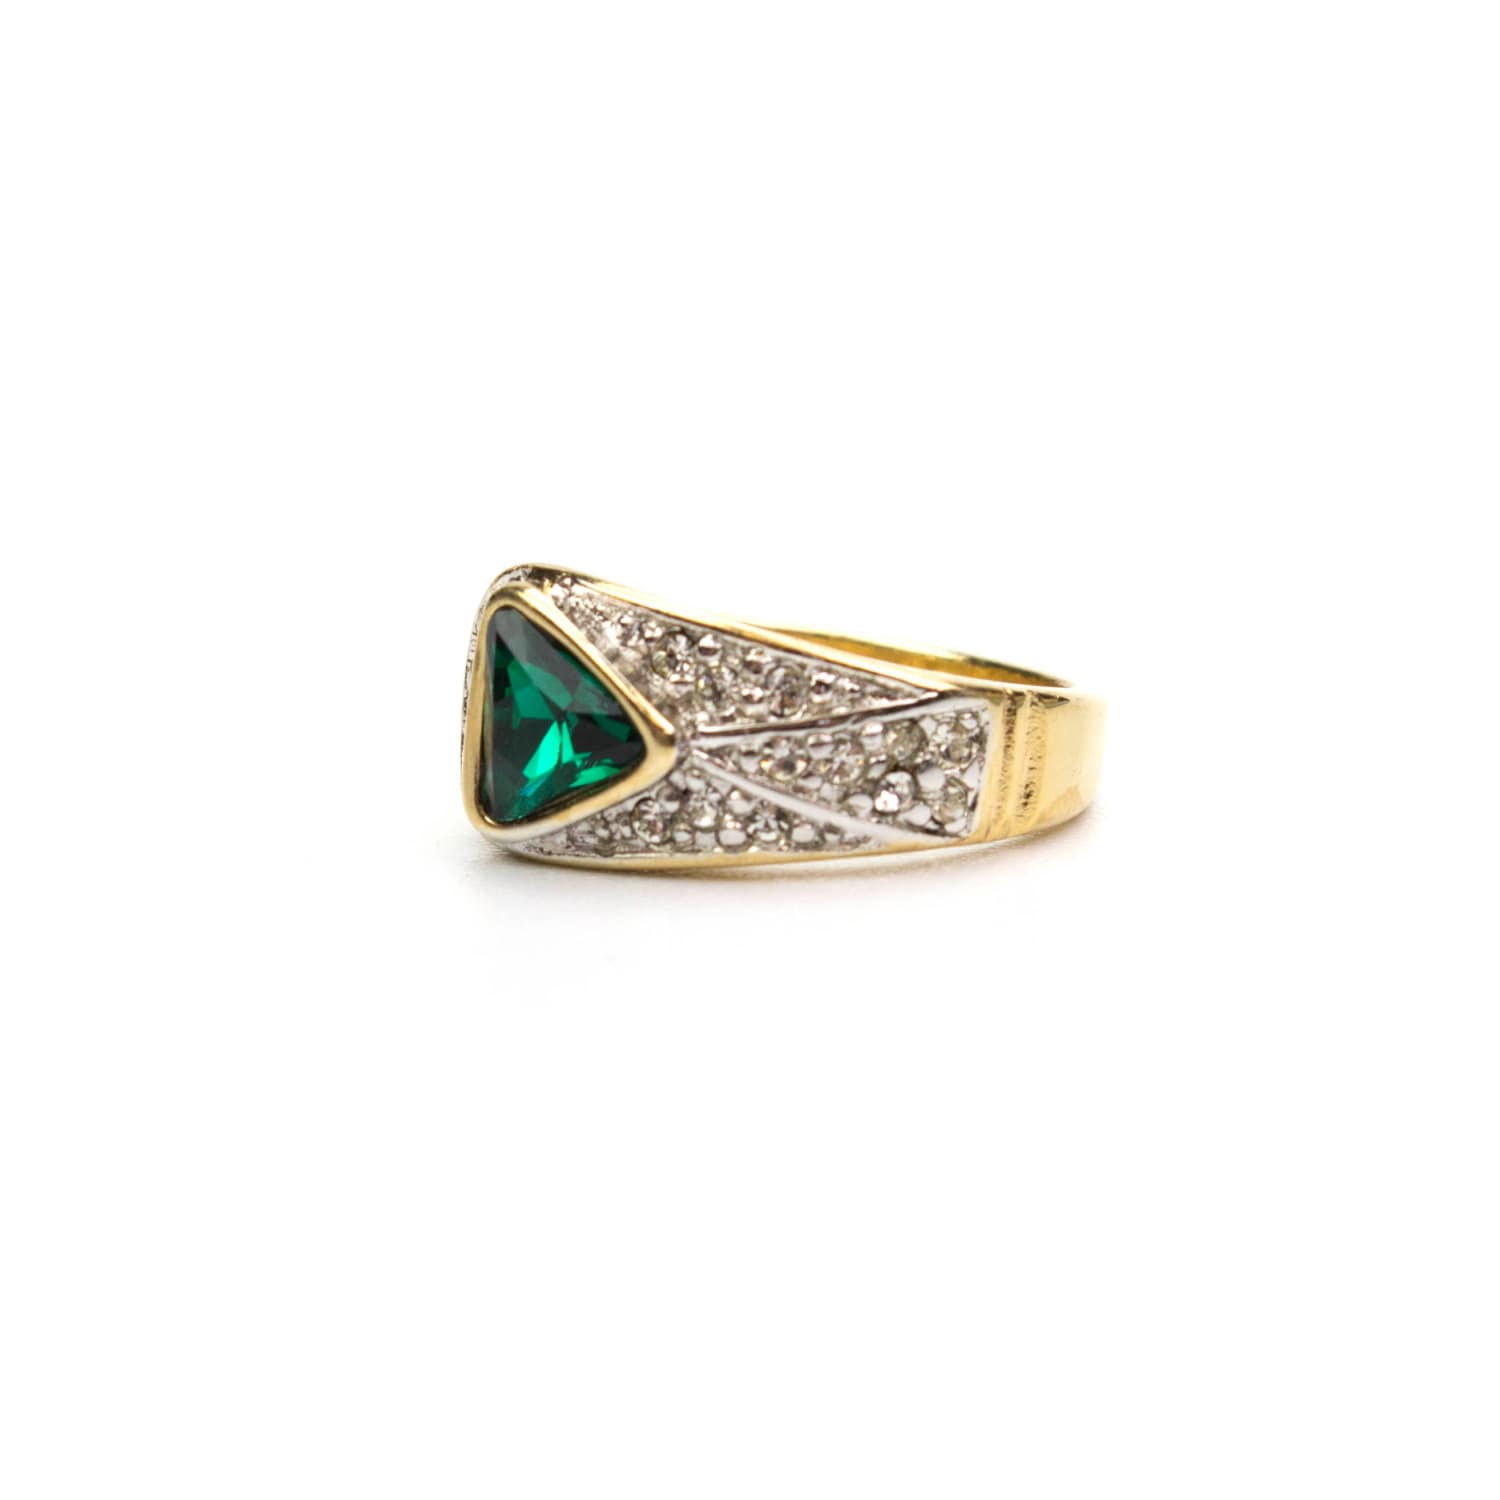 Vintage Ring Pave Trillion Cut Emerald and Clear Swarovski Crystal Ring 18k Gold Antique Womans Jewlery R2932 - Limited Stock - Never Worn